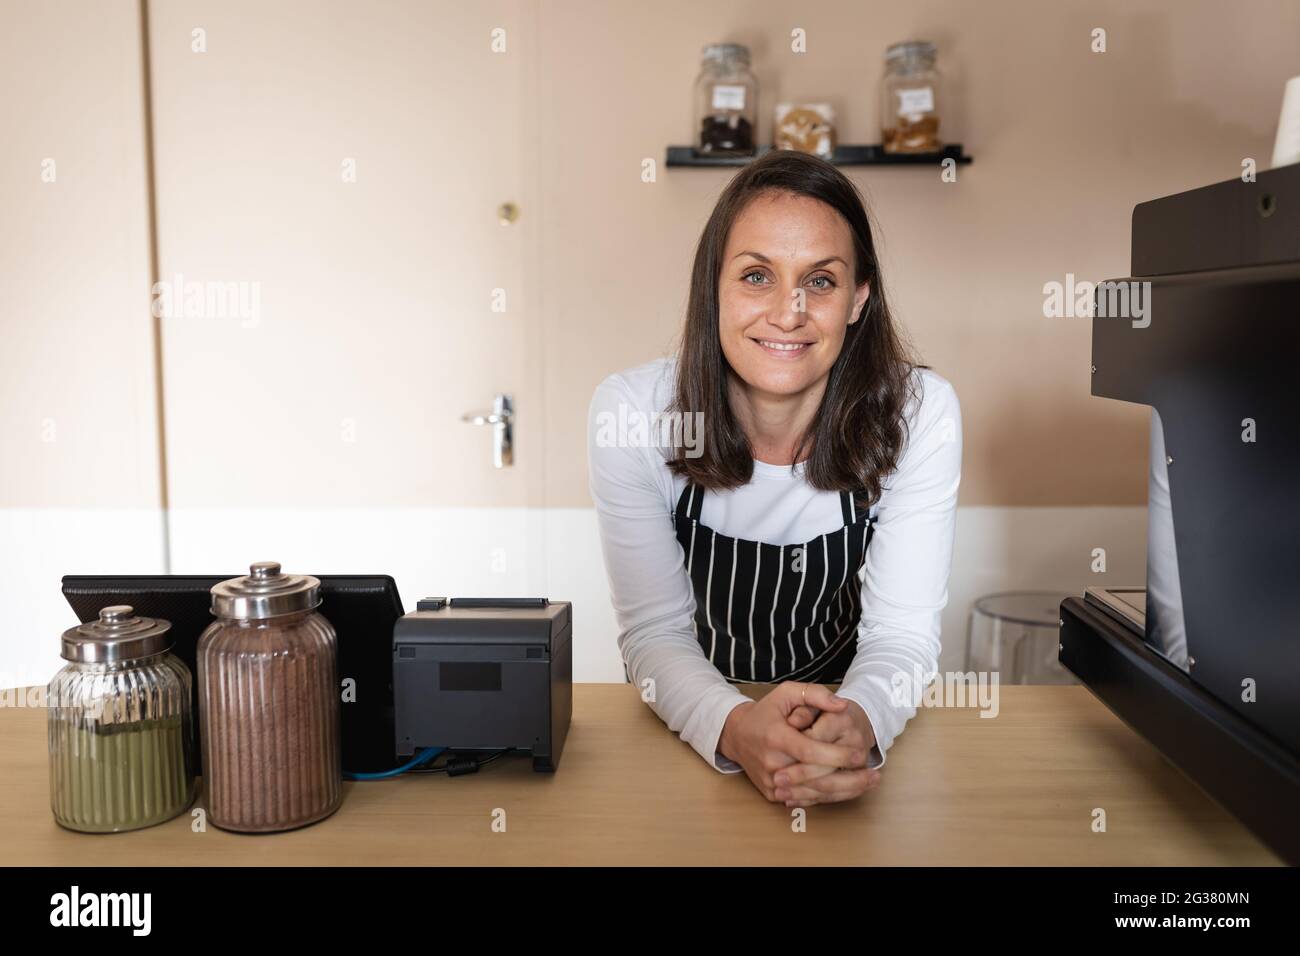 Smiling caucasian business owner standing at countertop and looking at camera Stock Photo